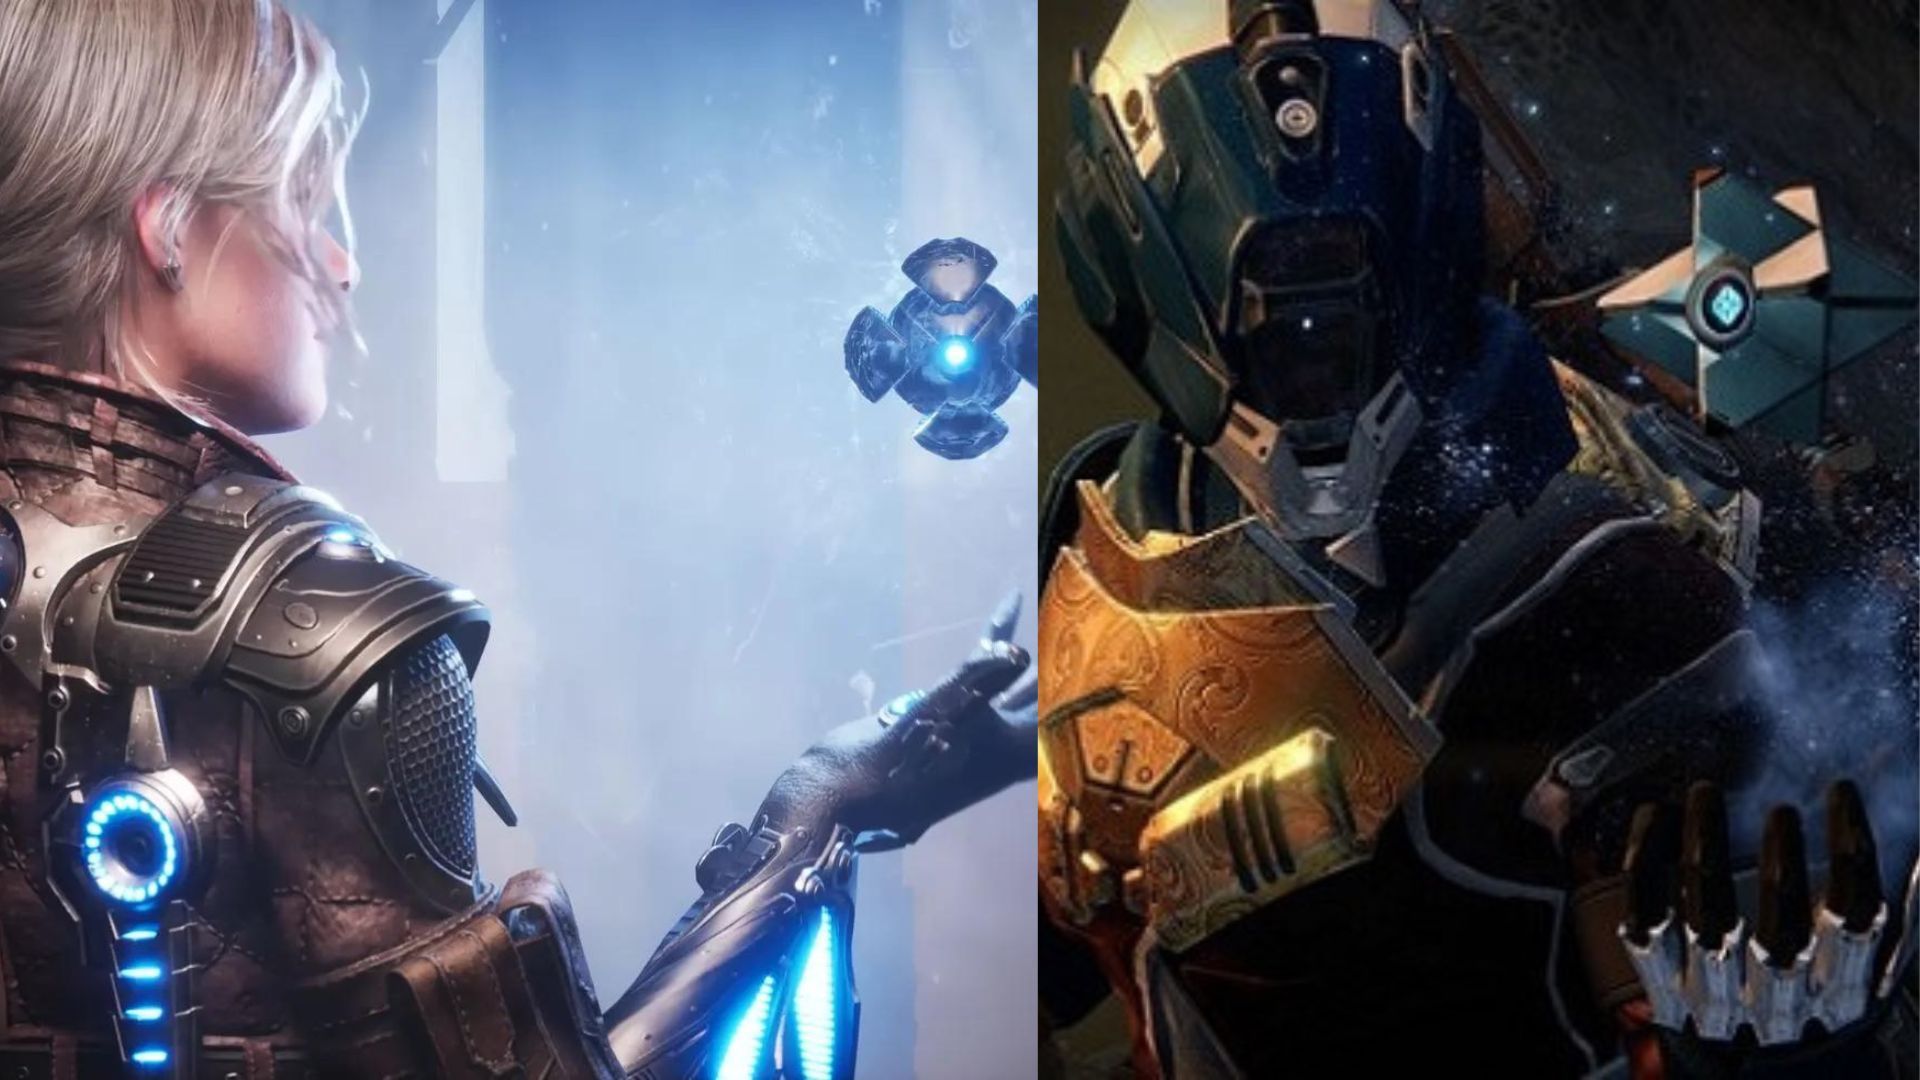 A First Descendant character with an orb next to a Destiny 2 Guardian and a Ghost